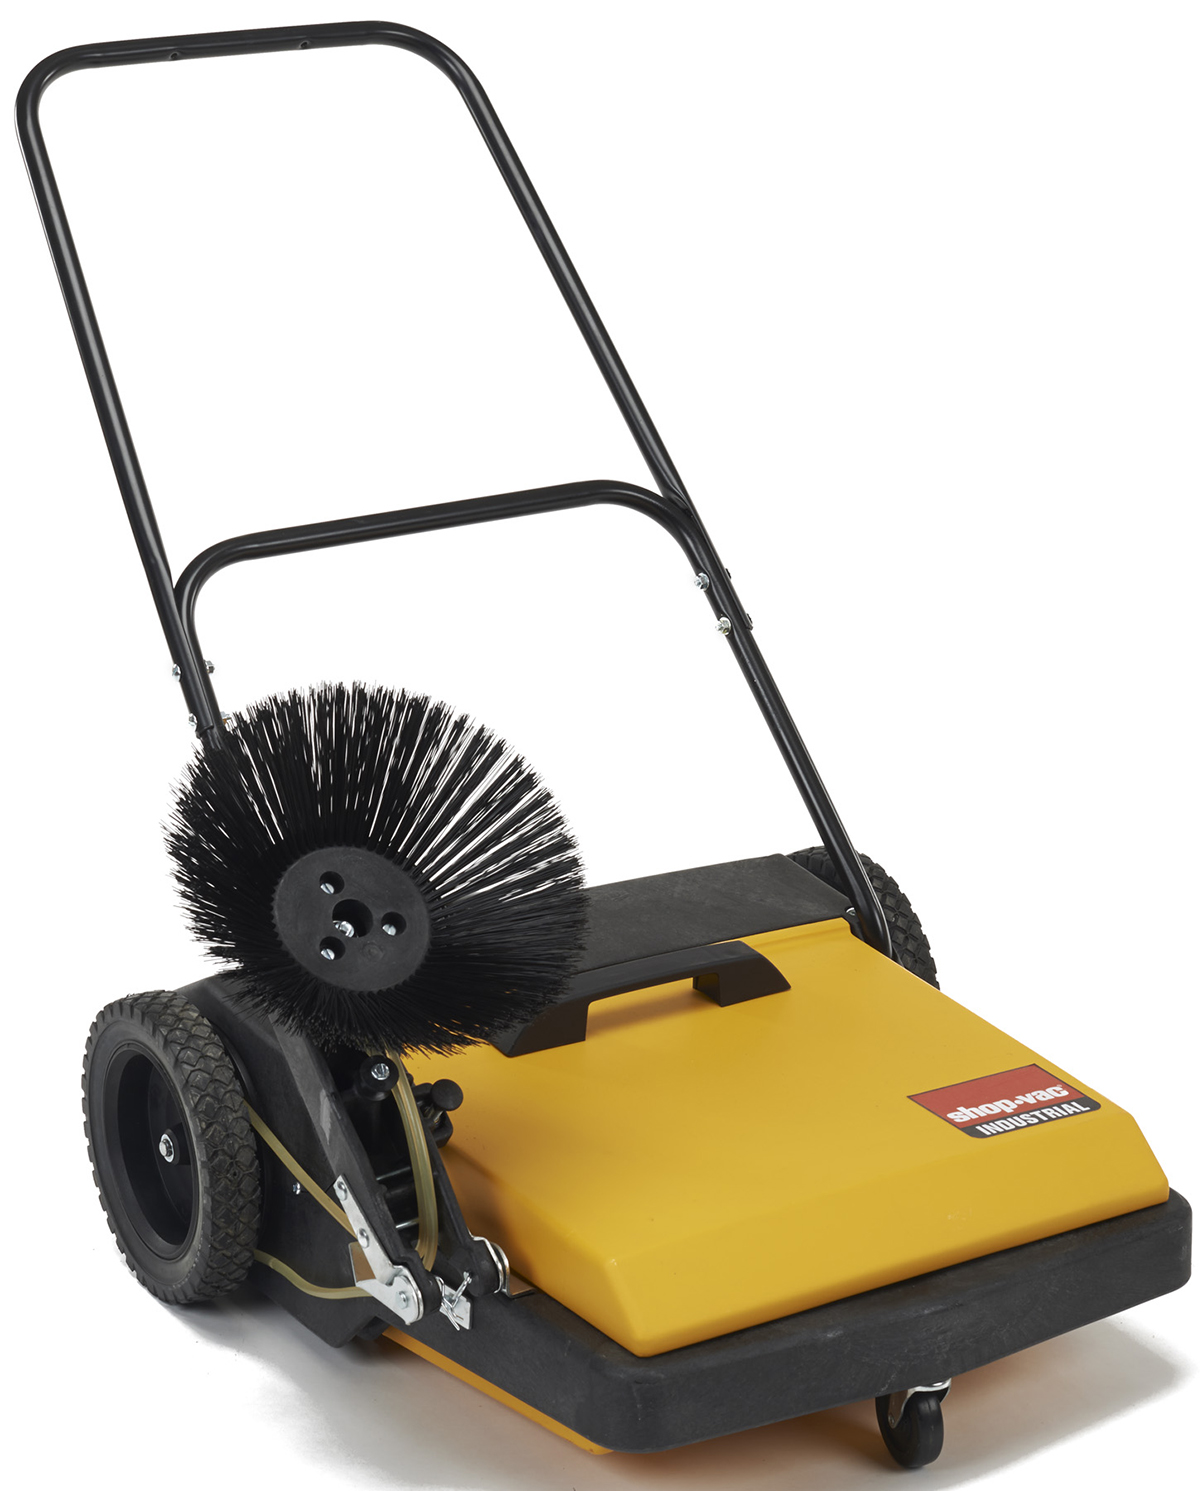 Shop-Vac Industrial Push Sweeper, 3050010 - image 2 of 7